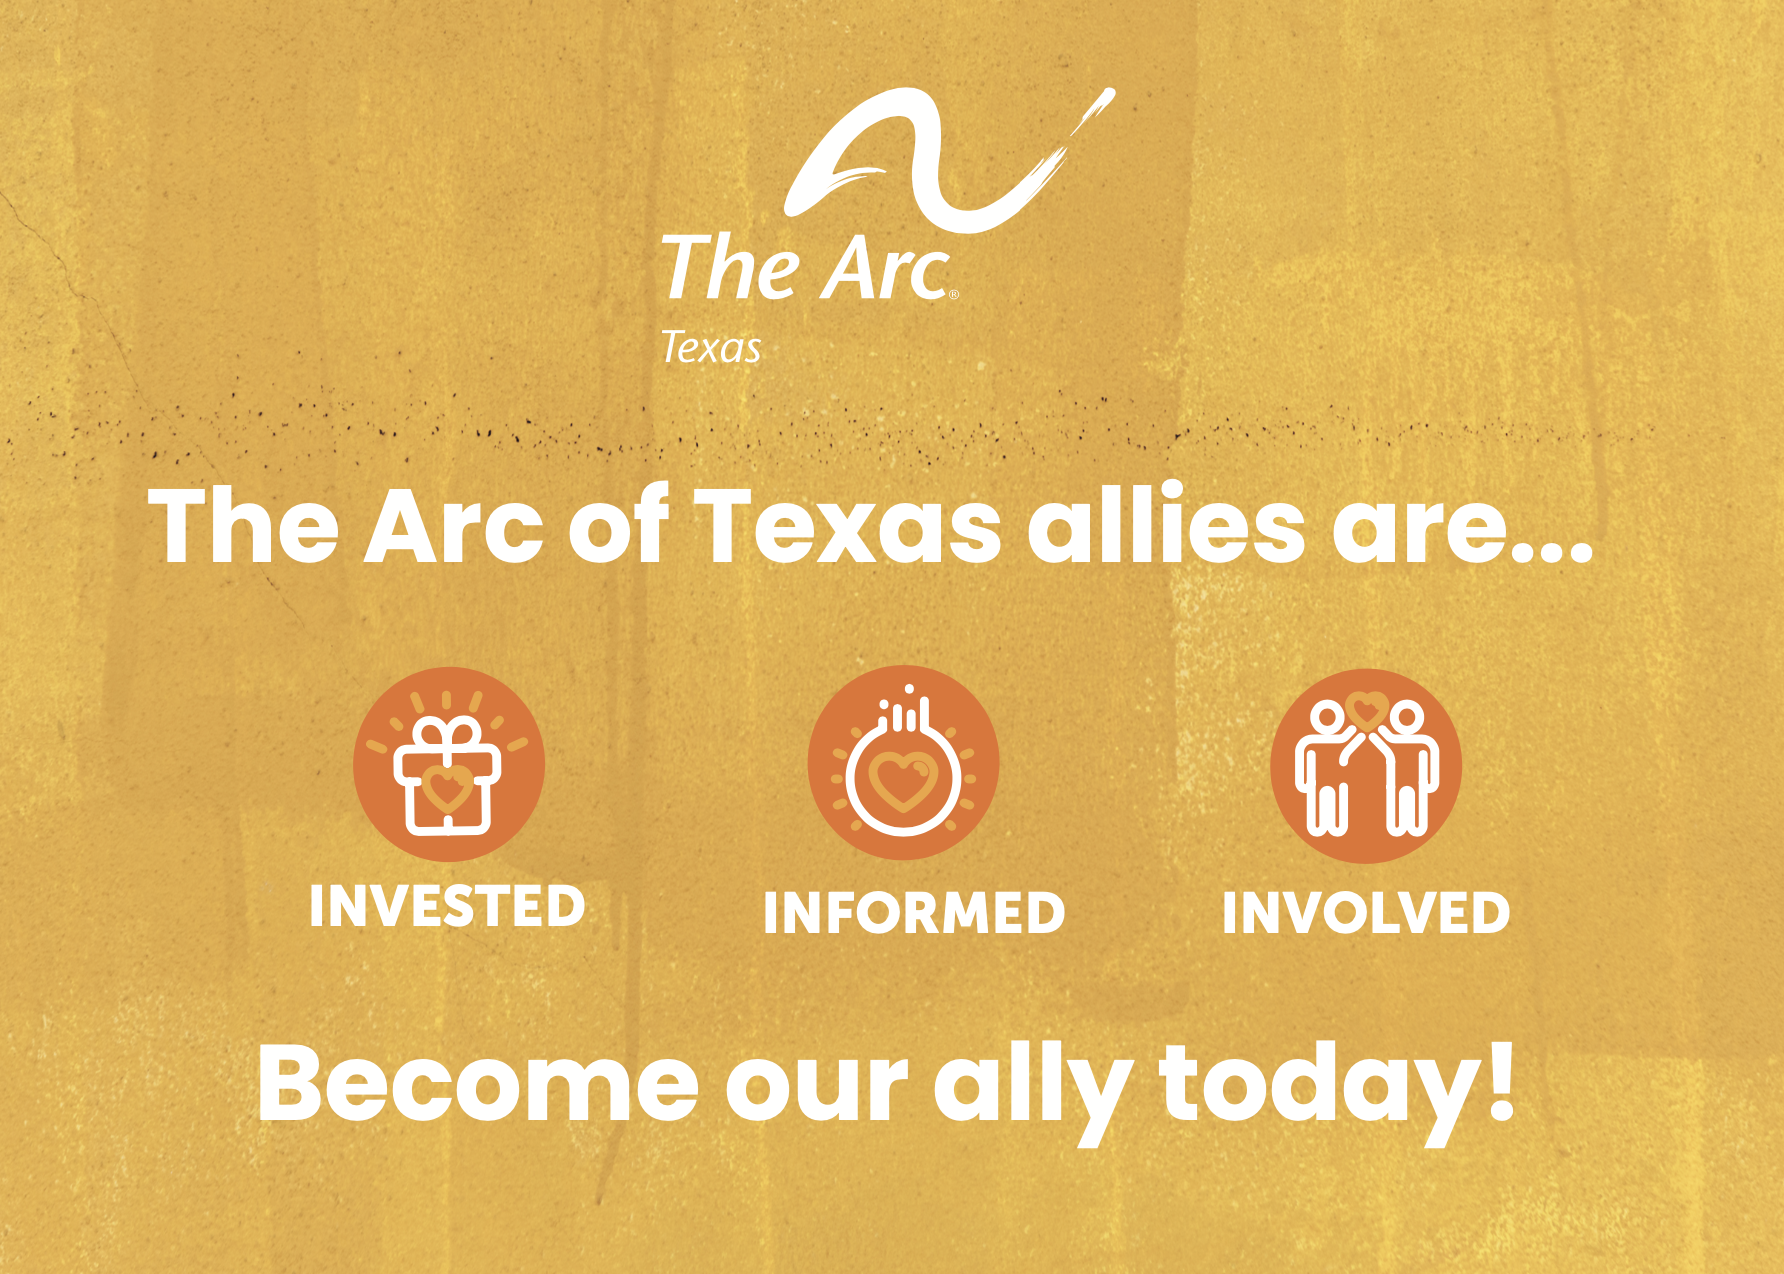 A golden yellow background with The Arc of Texas logo in white at top. Underneath in white reads "The Arc of Texas allies are..." underneath are 3 orange circles
in a straight line labeled "Invested" (white gift icon with light orange heart) "Informed" (white lightbulb icon with light orange heart inside) and "Involved" (white icon of individuals holding a light orange heart together). Below the circles in white it reads "Become our ally today!"